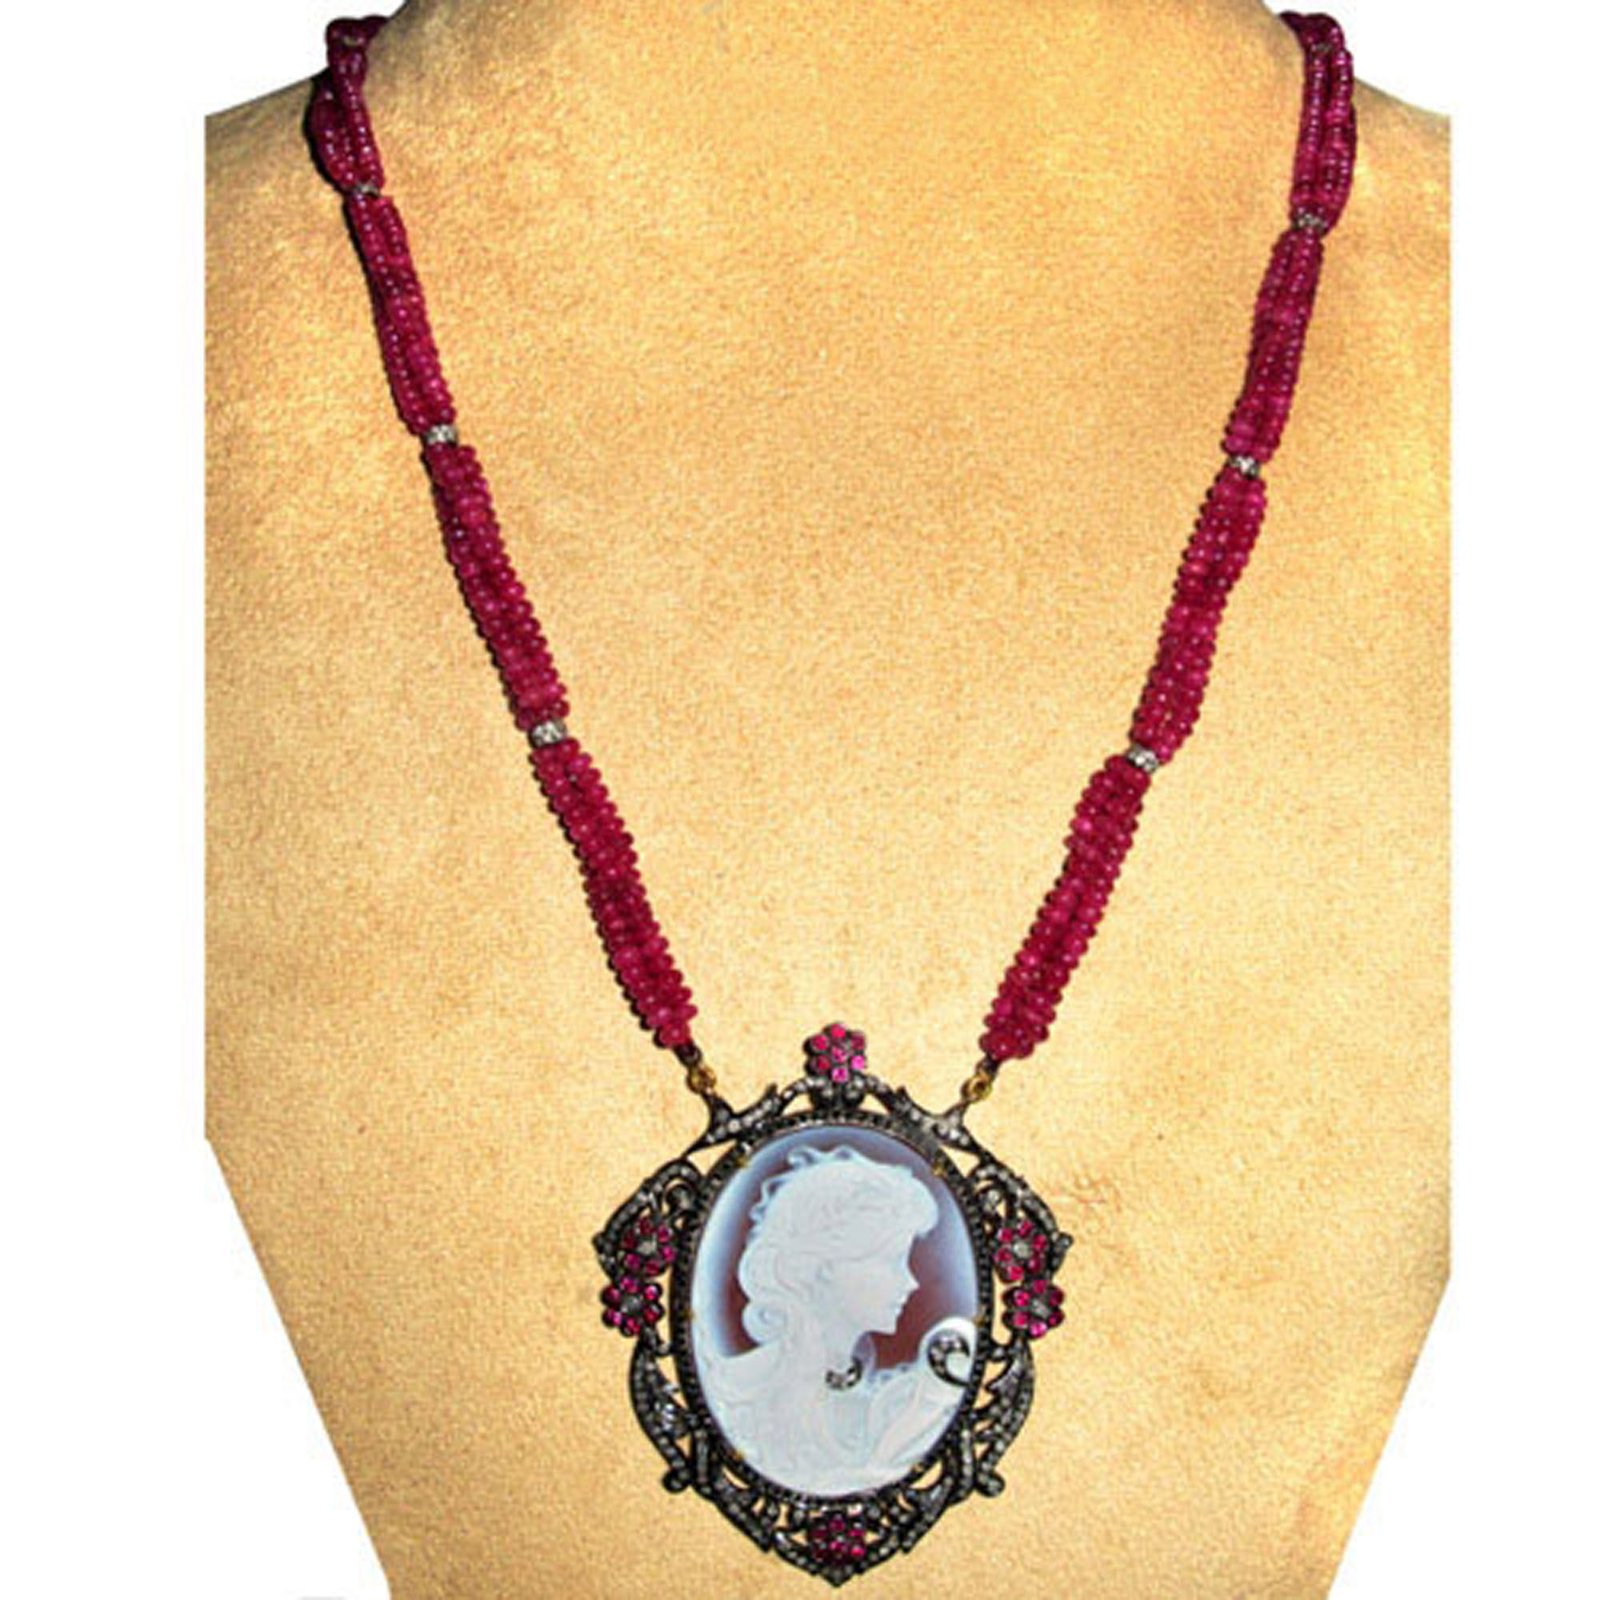 Cameo carved diamond pendant with ruby beads necklace